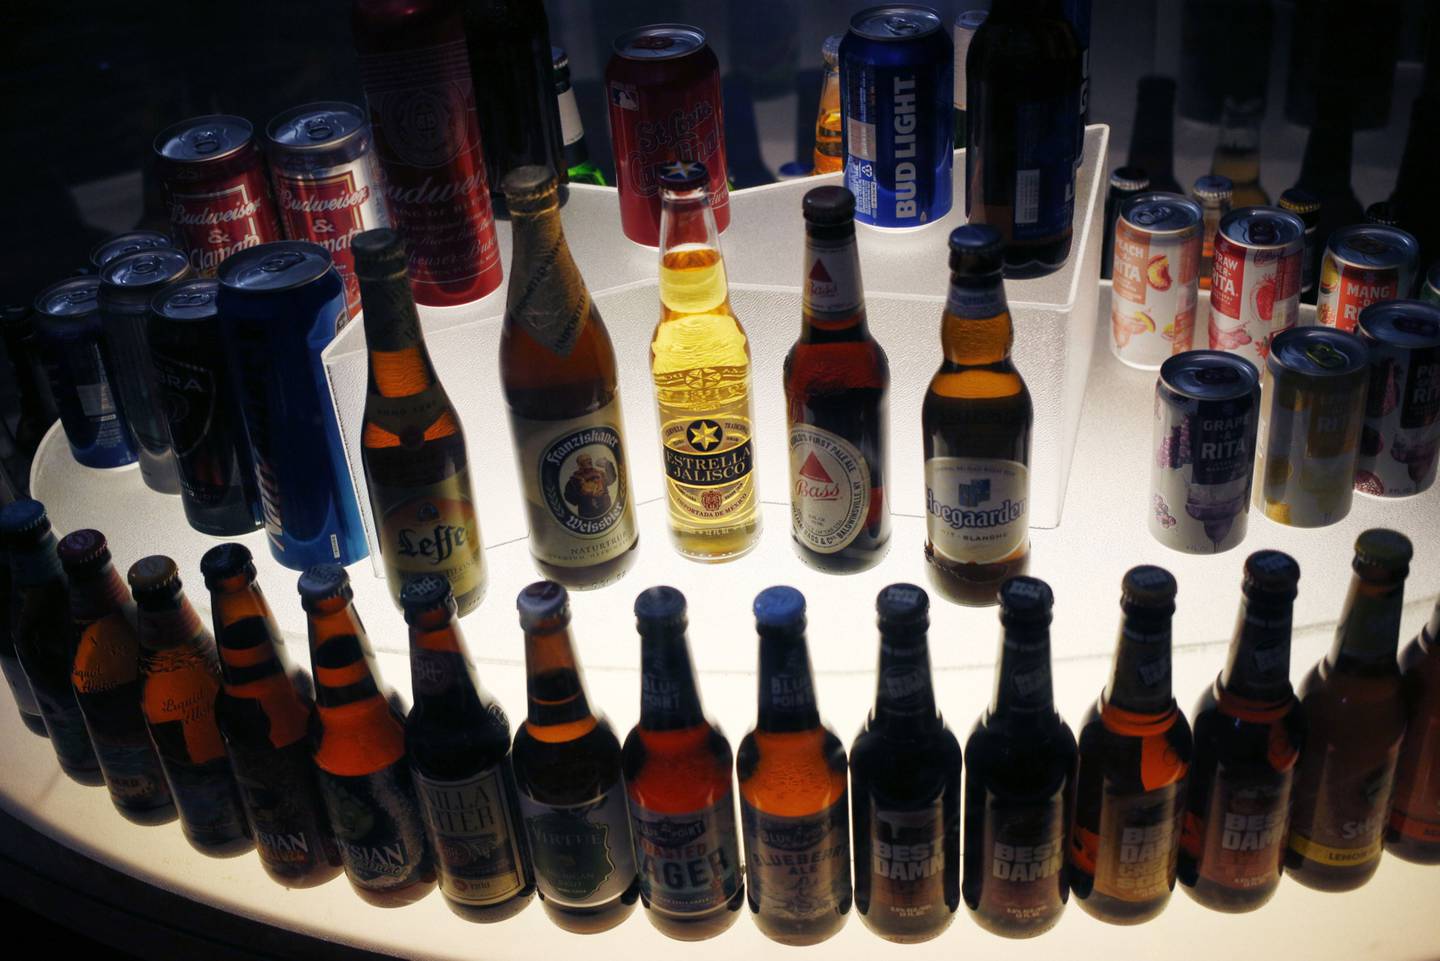 CEO Michel Doukeris said AB InBev's brands such as Stella Artois and Corona “enabled us to meet the moment in an ongoing dynamic operating environment.”